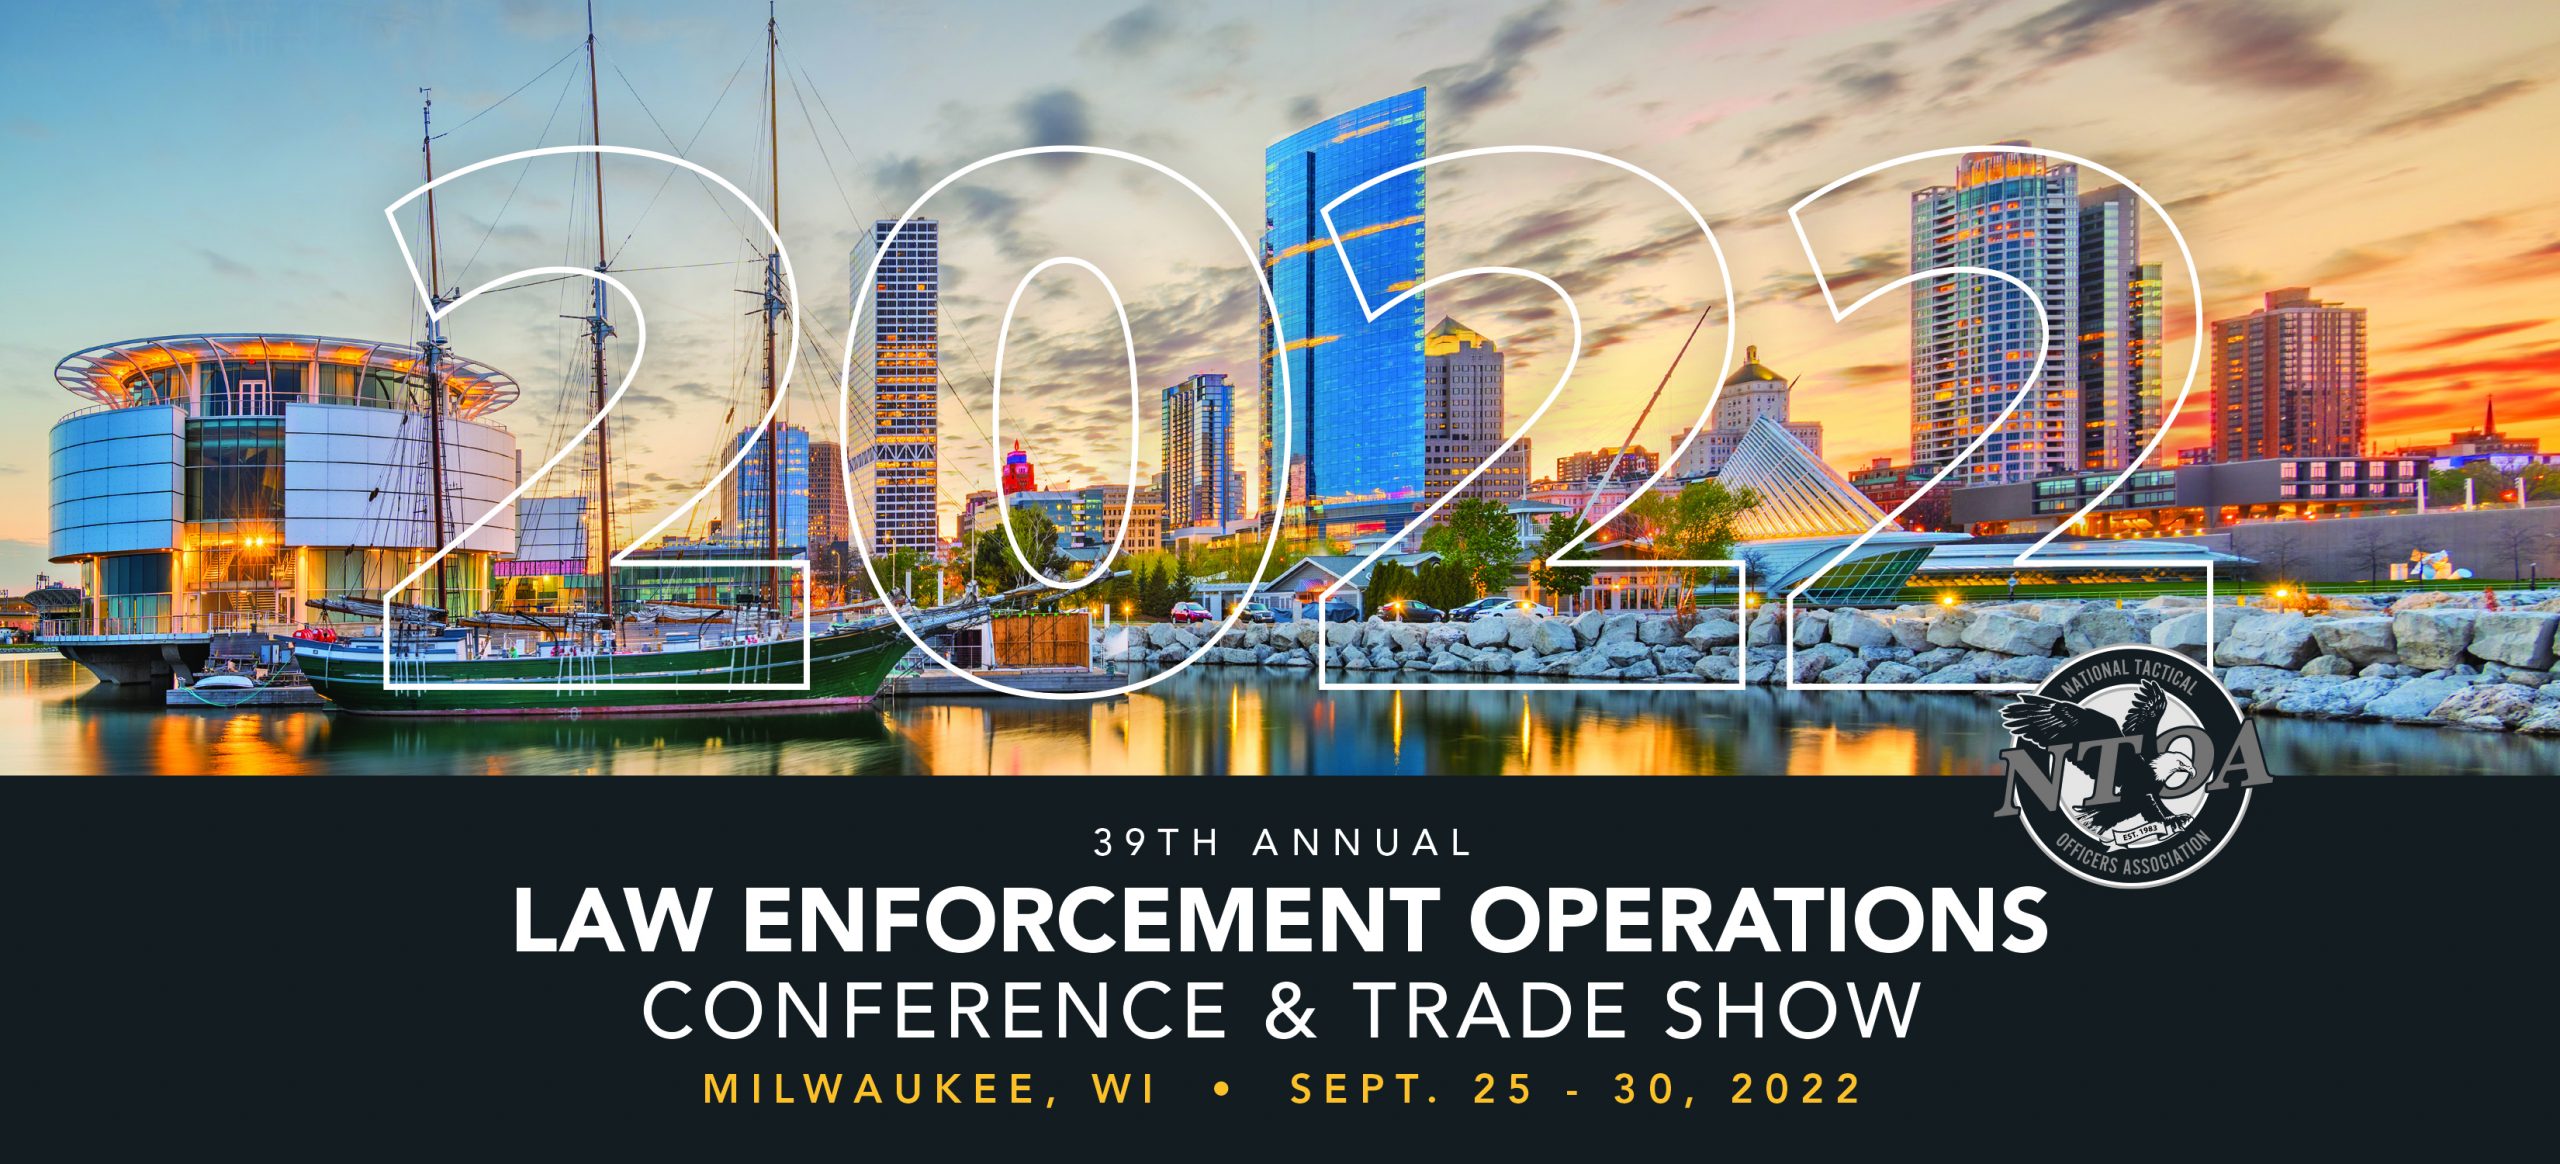 39th Annual Law Enforcement Operations Conference & Trade Show (NTOA